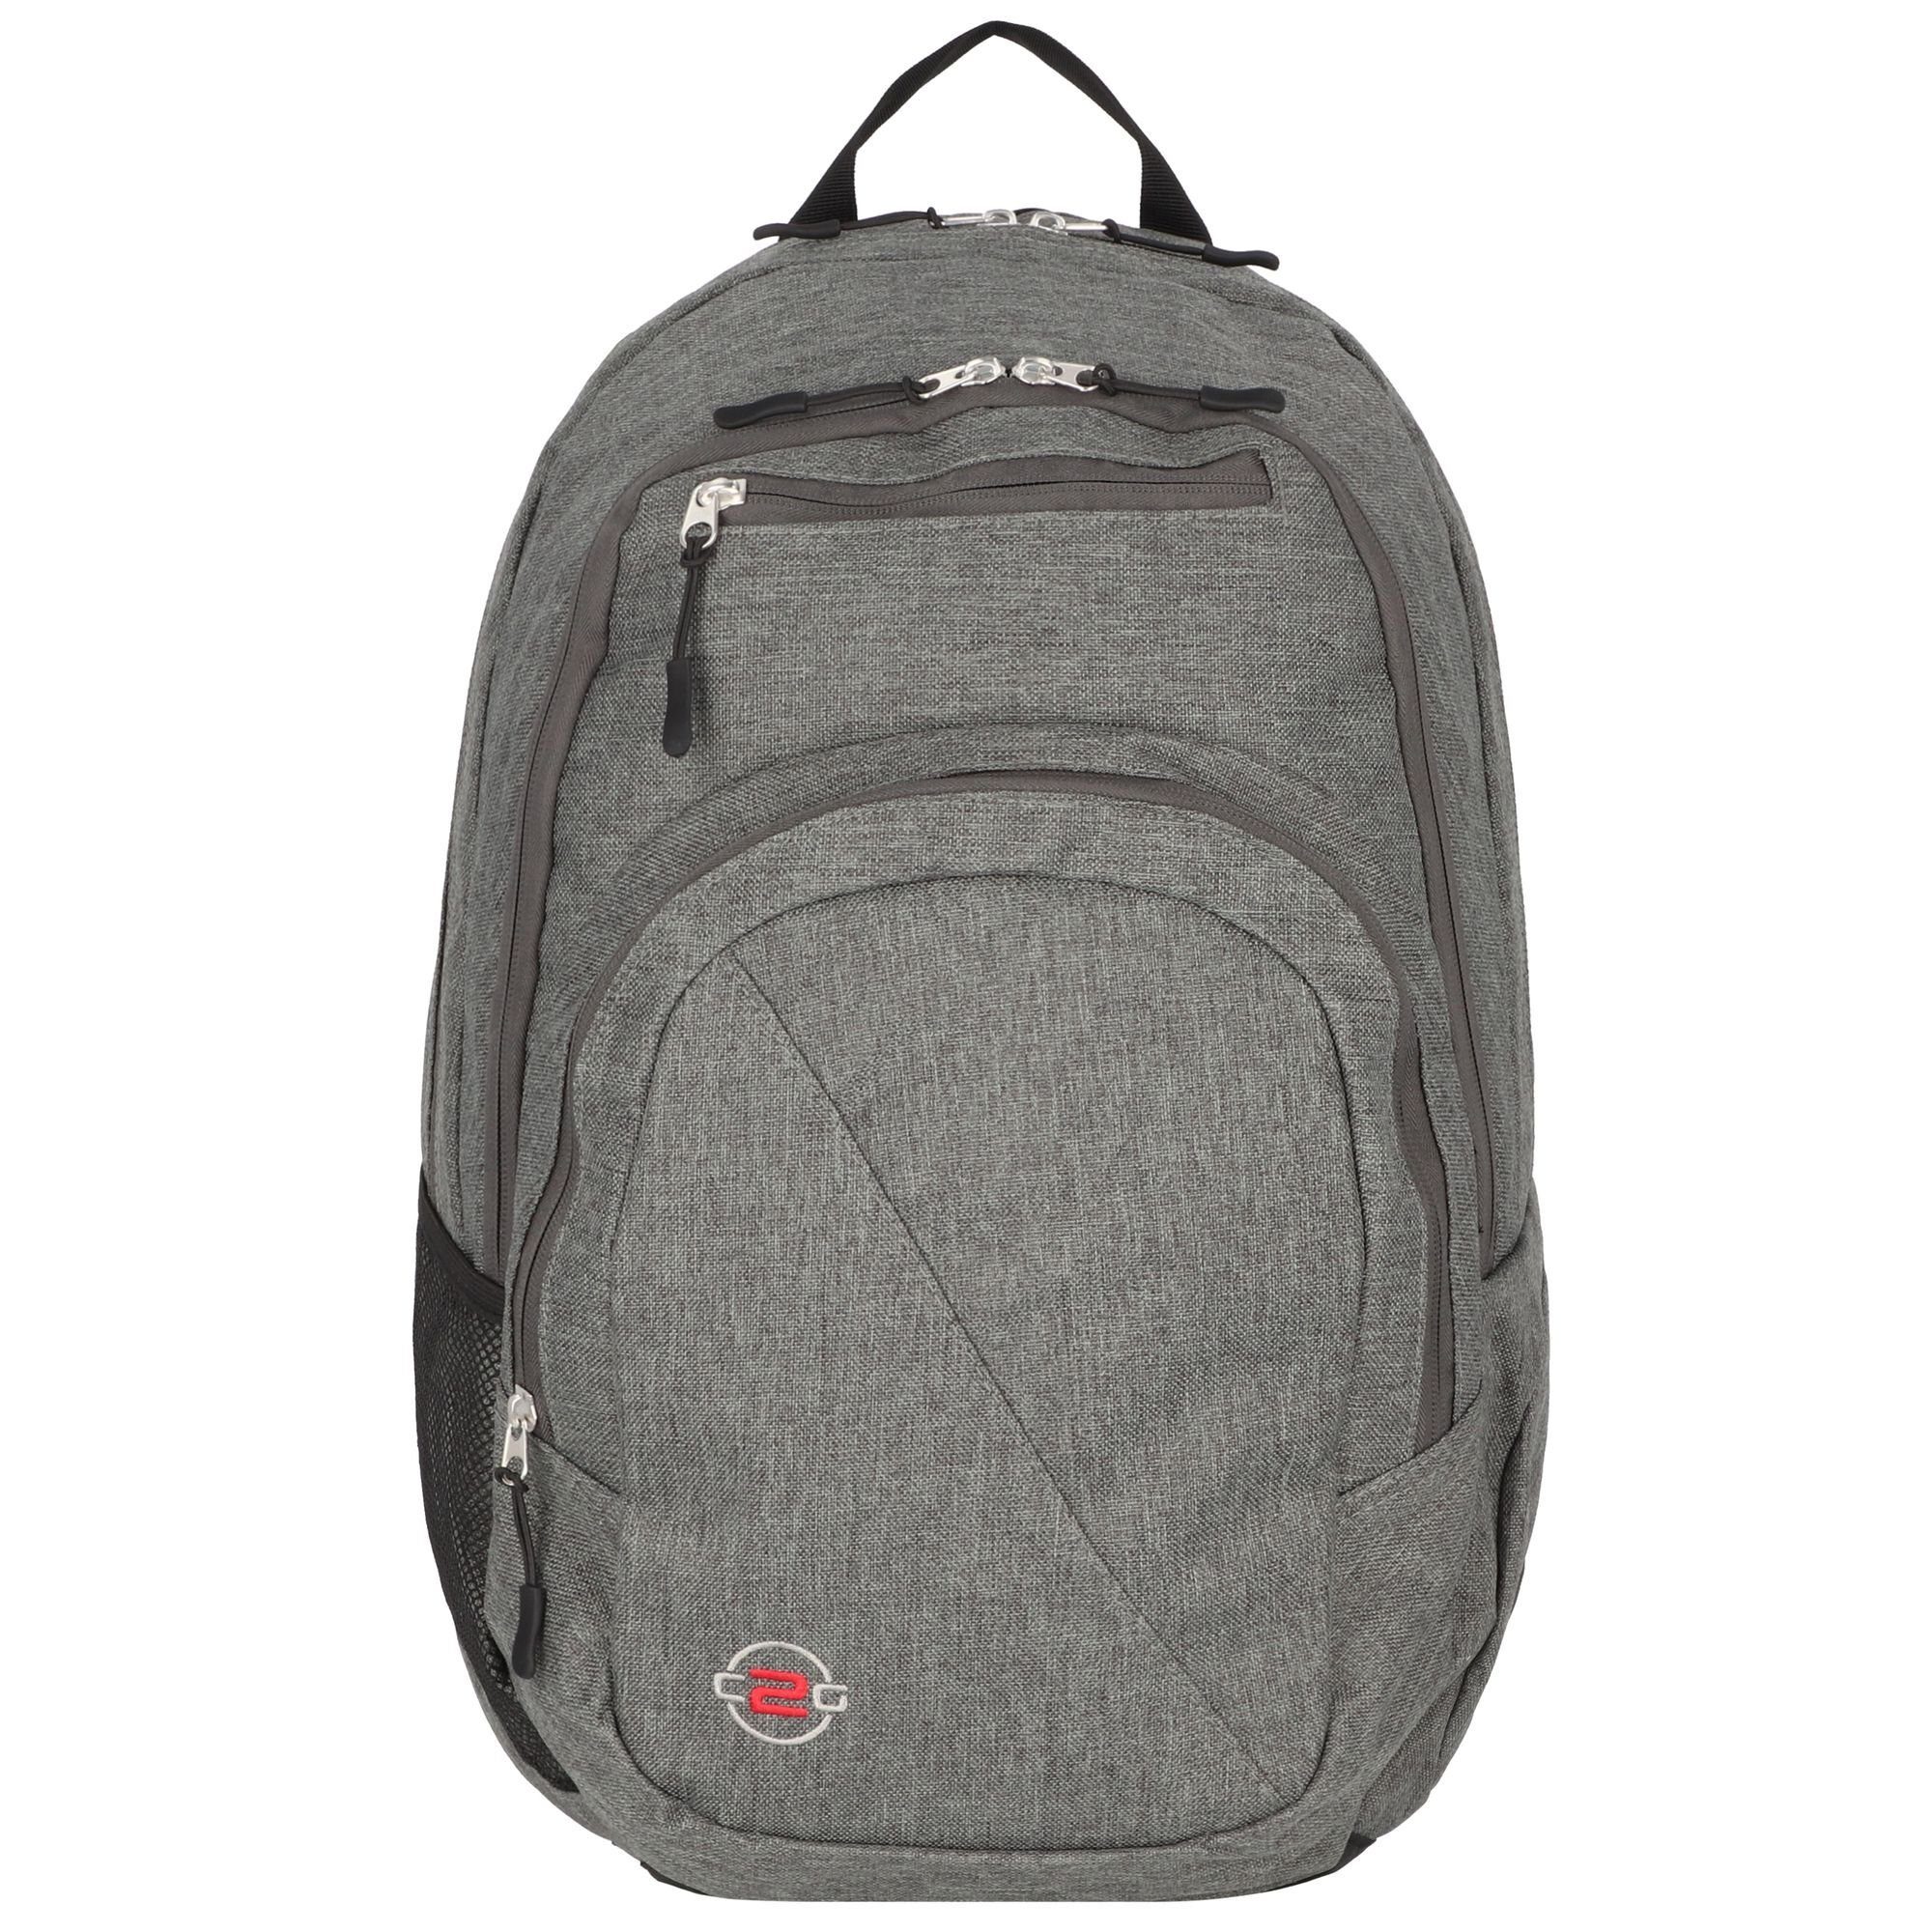 NOWI Daypack, Polyester